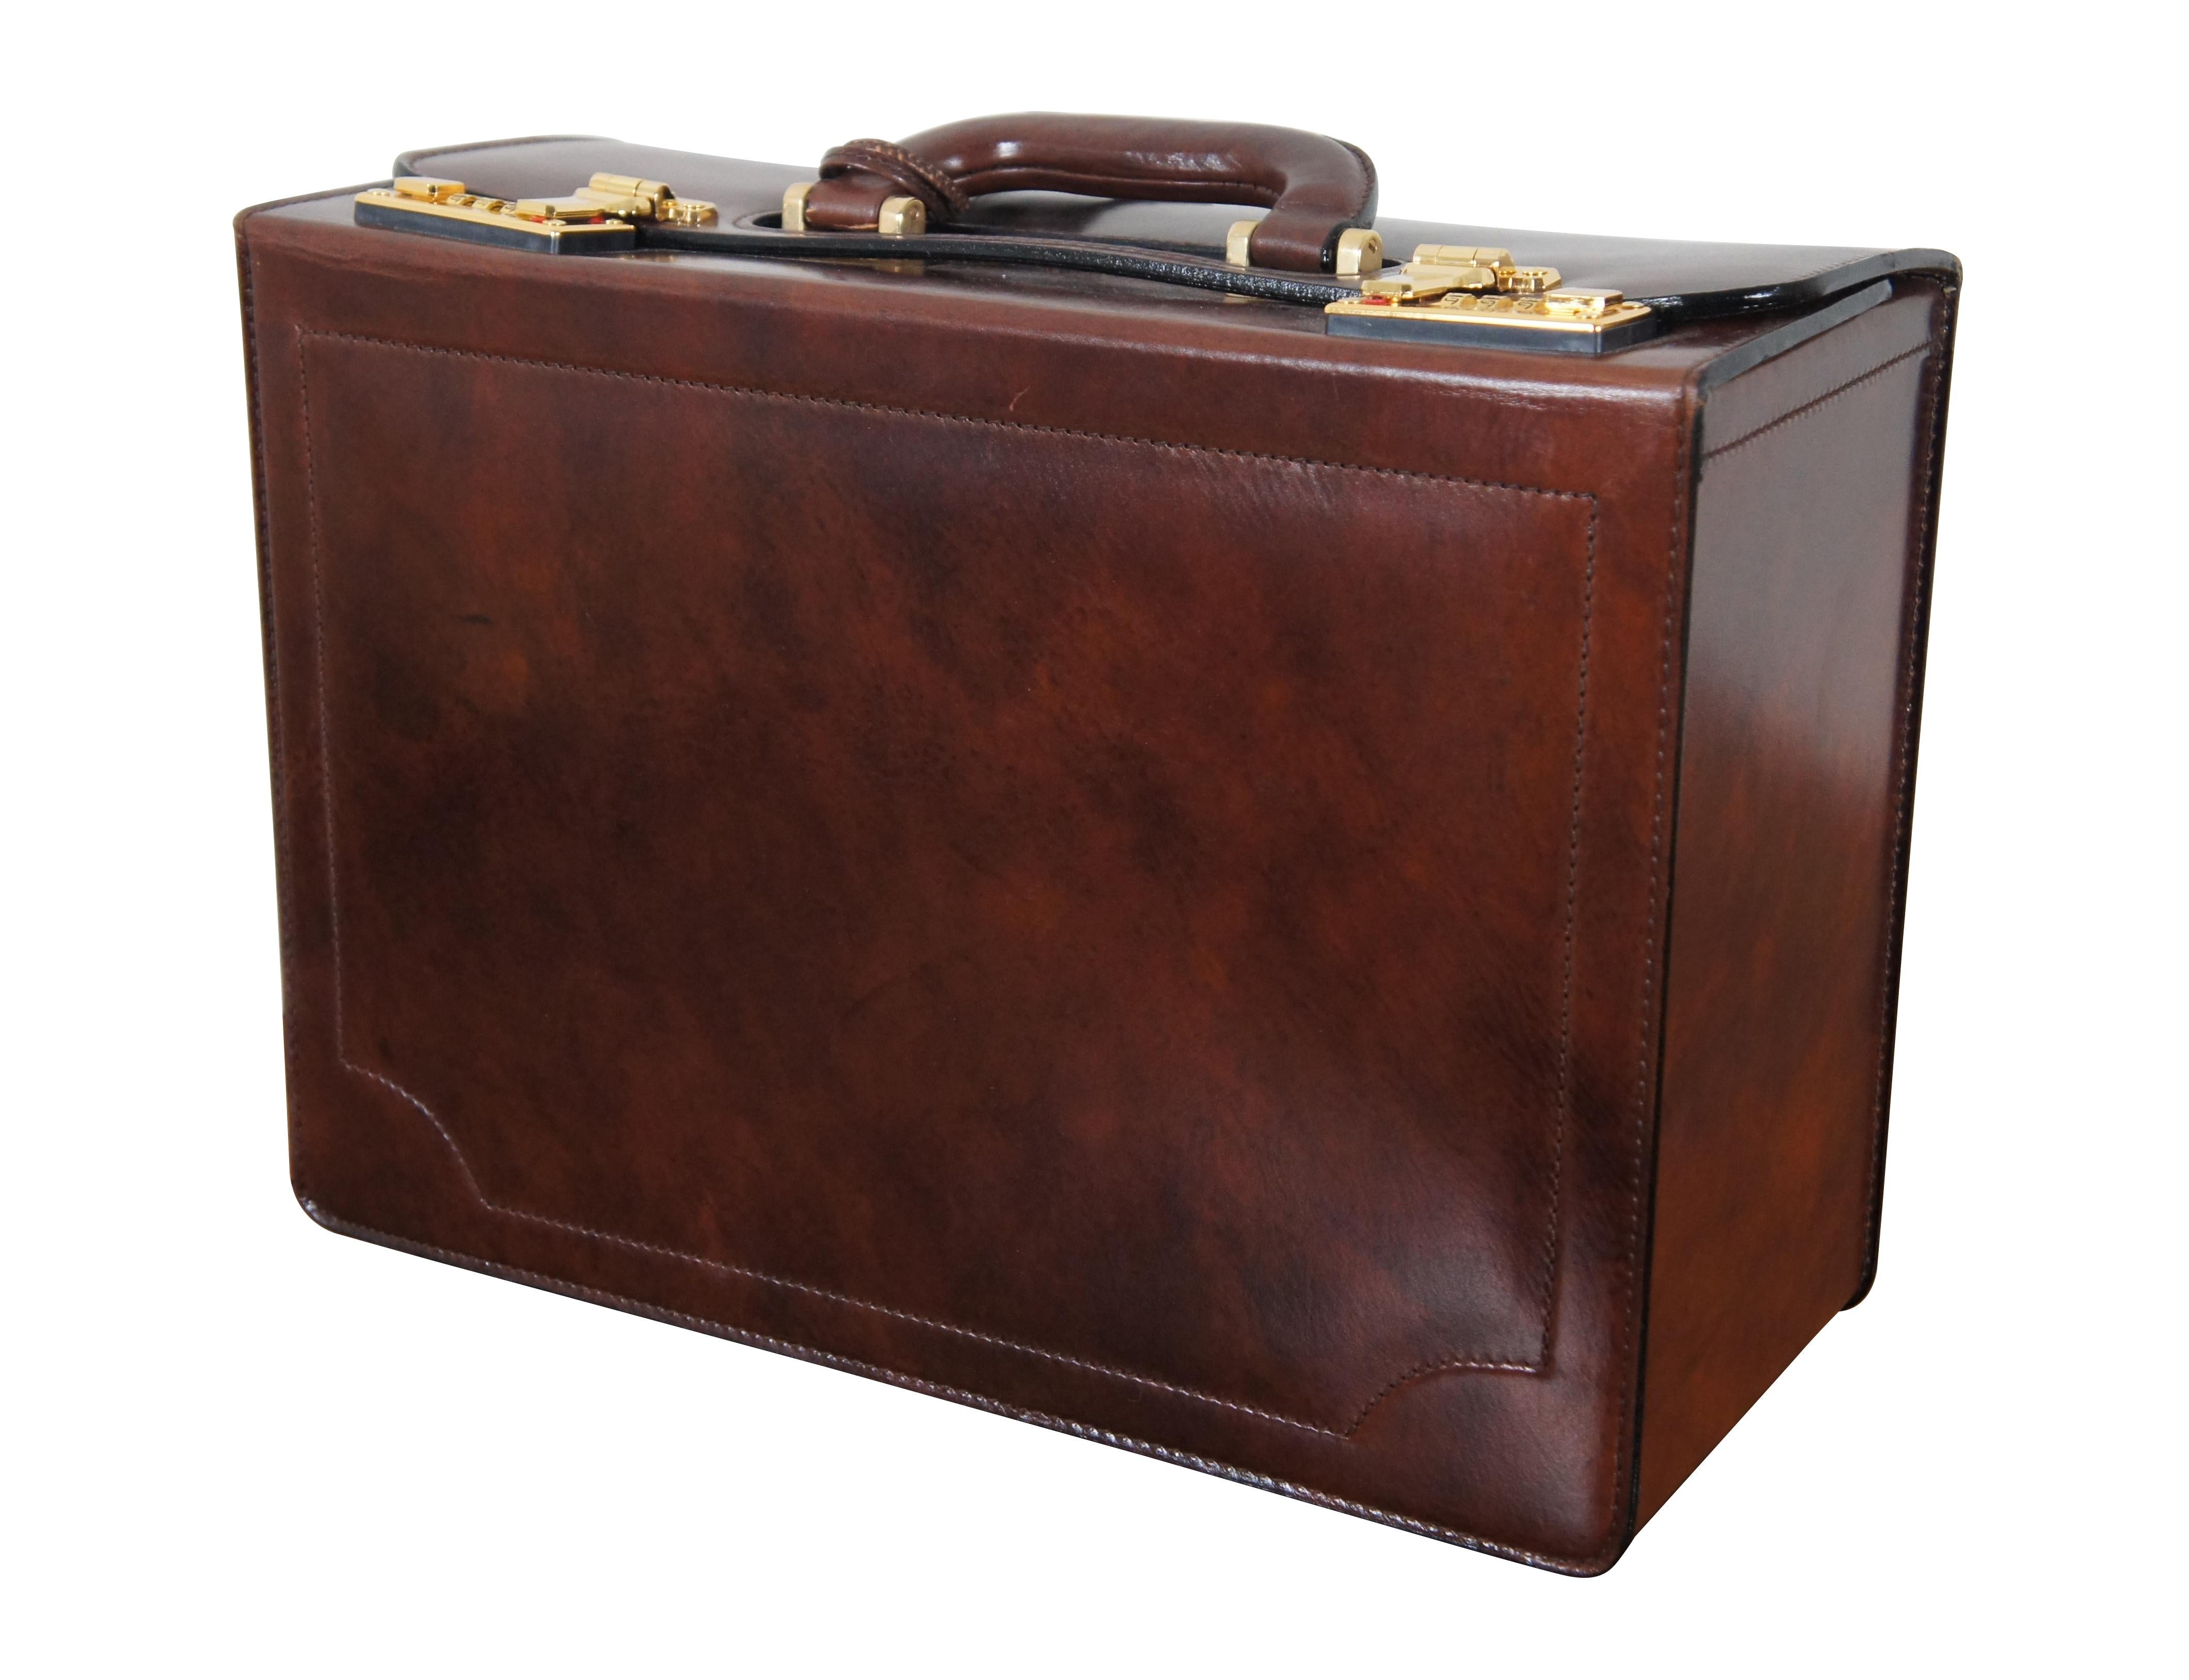 Vintage mottled brown leather brief case / document case featuring brass feet, single handle, overlapping flap top, and double latches with Presto Top Change combination locks (currently set to default 000). Interior features three divided sections